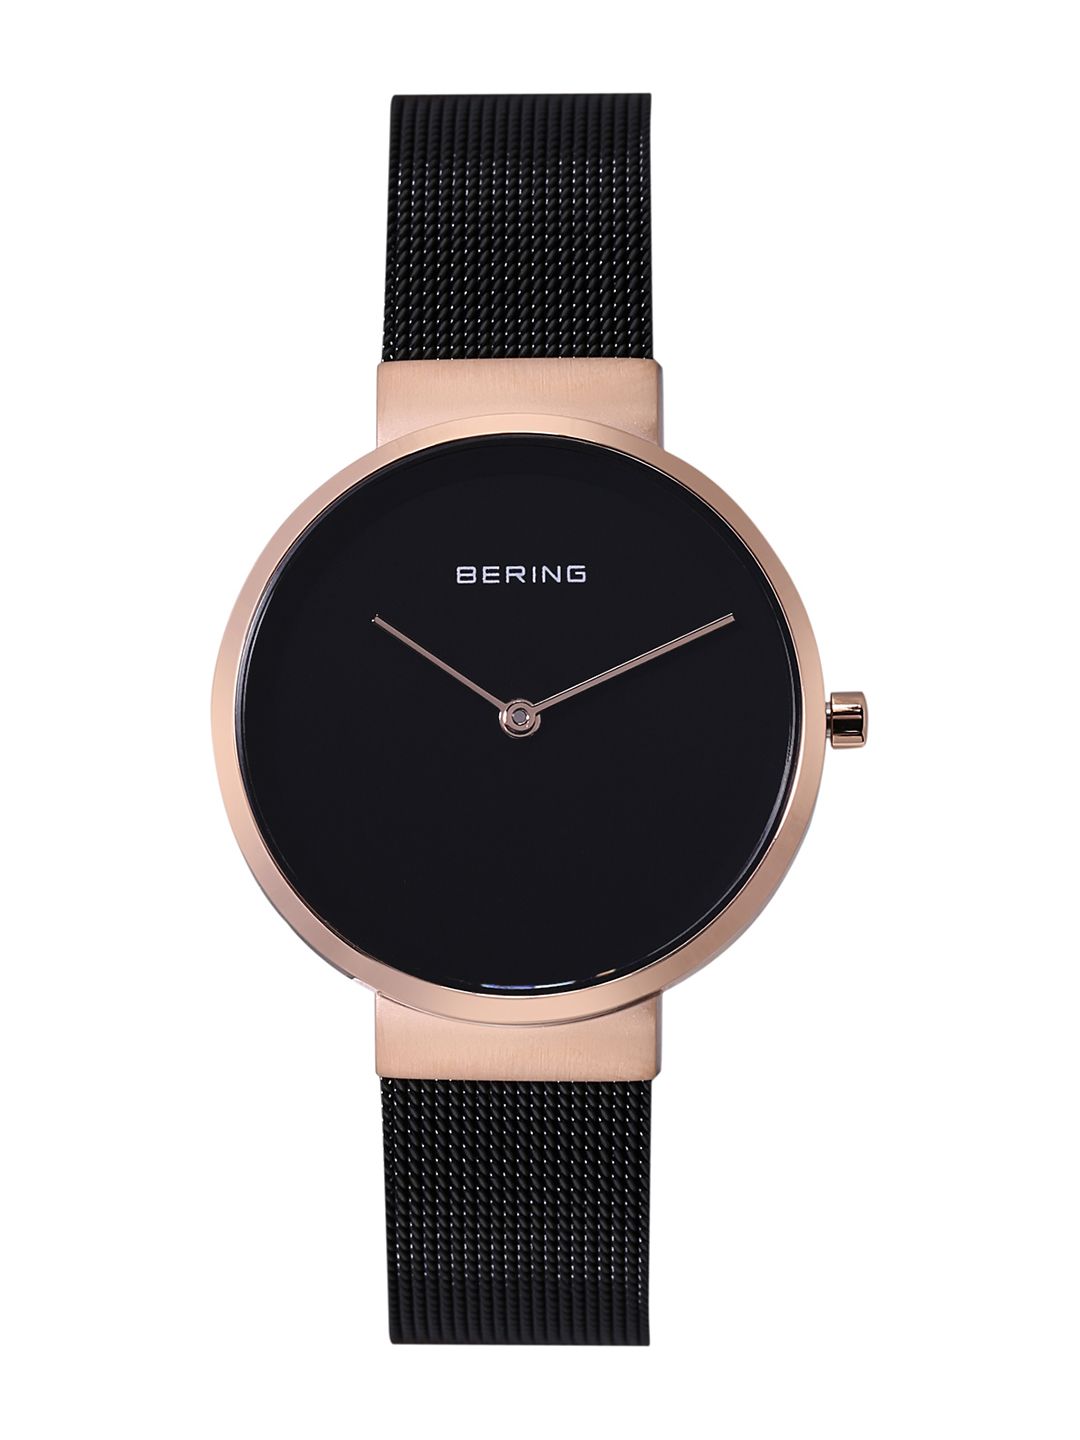 Bering Women Classic Black Sapphire Crystal Analogue Watch 14531-166 Price in India